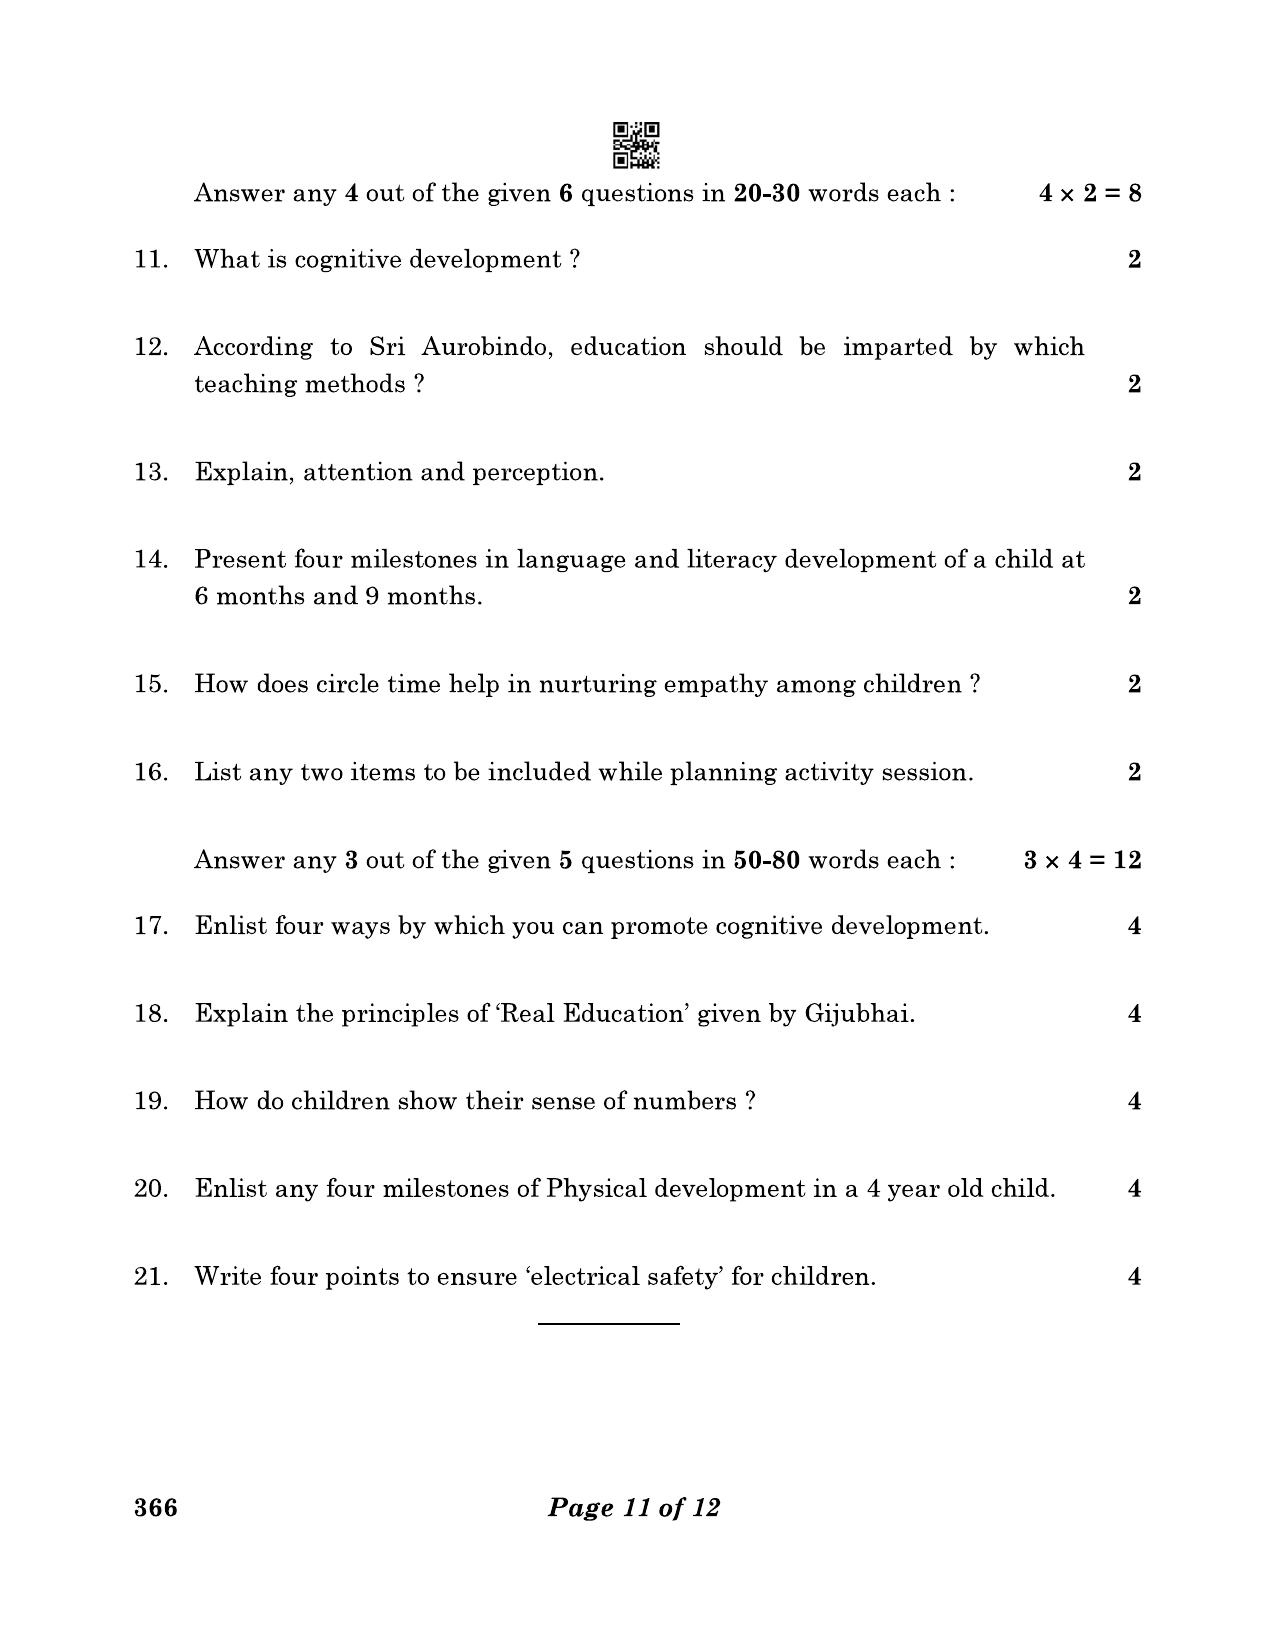 CBSE Class 12 366_Early Childhood Care & Education 2023 Question Paper - Page 11